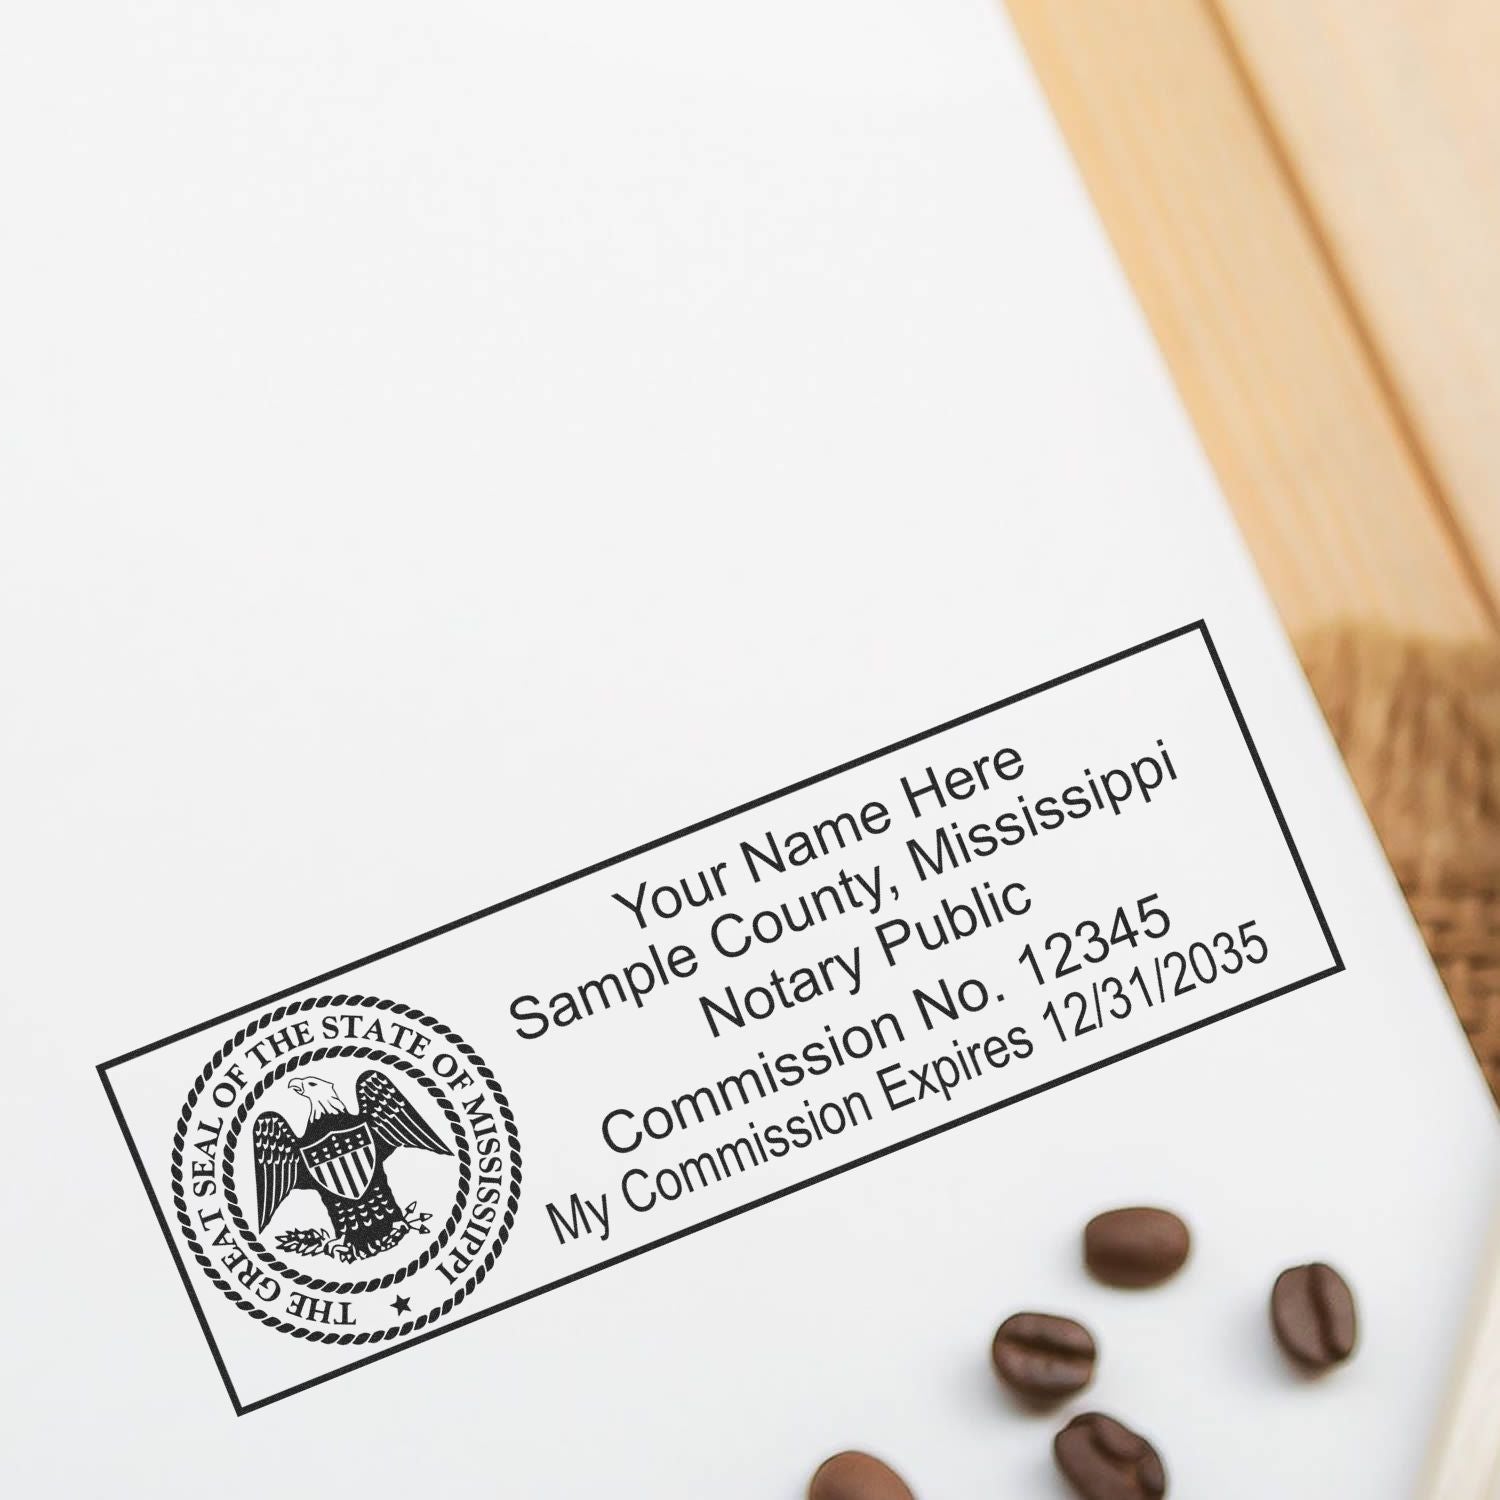 The main image for the Wooden Handle Mississippi State Seal Notary Public Stamp depicting a sample of the imprint and electronic files